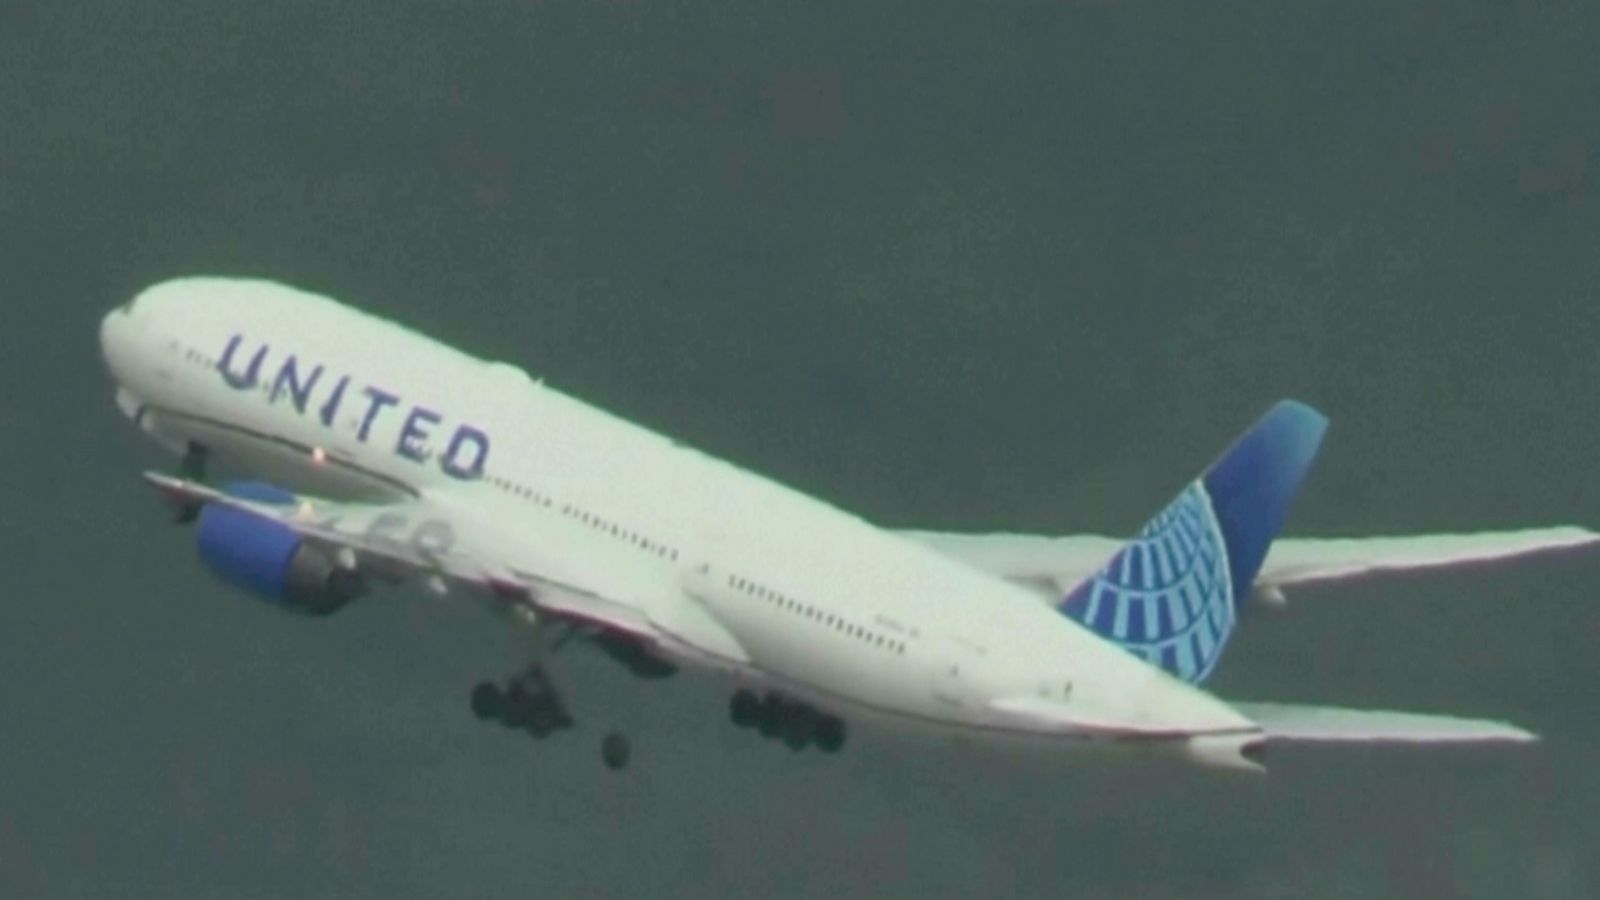 United Airlines flight makes safe landing in Los Angeles after losing tyre